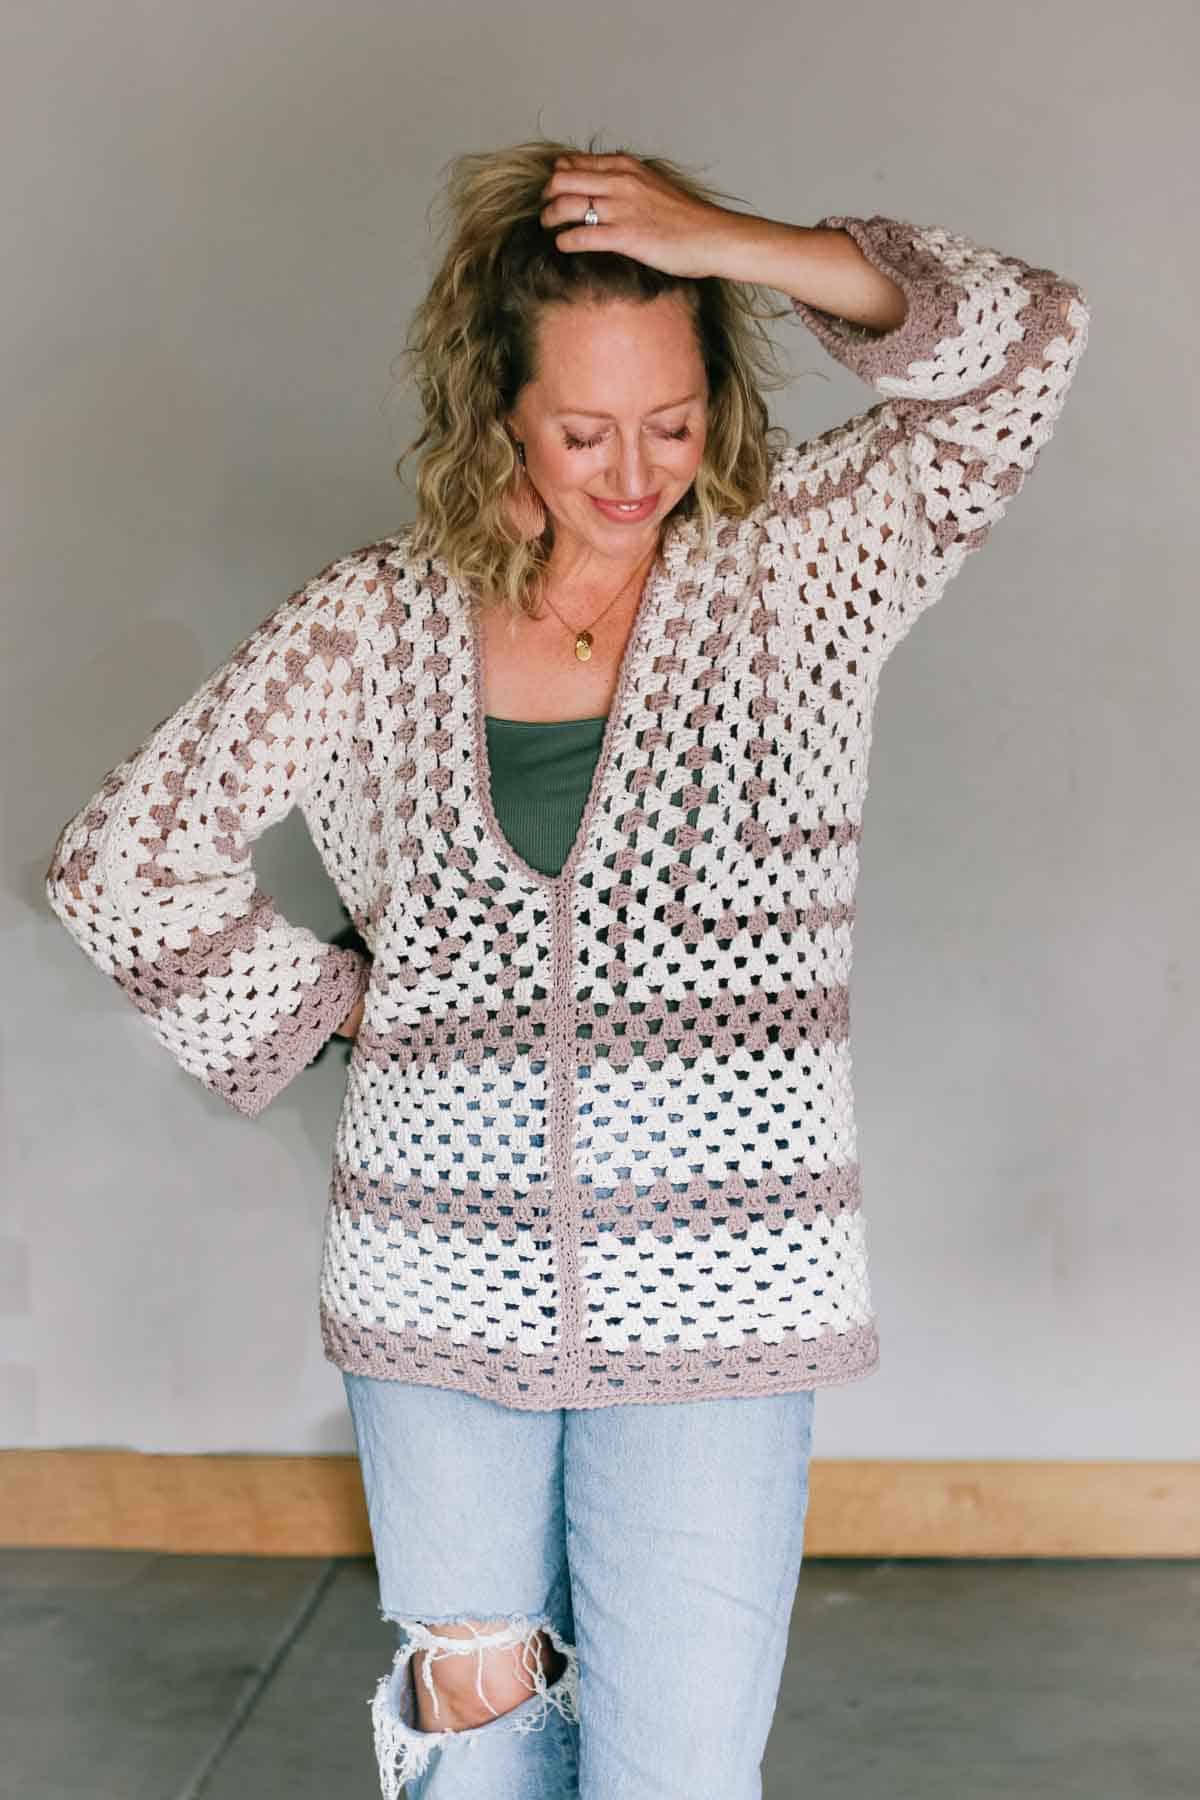 Crochet hexagon pullover sweater modeled by a blond woman wearing jeans.